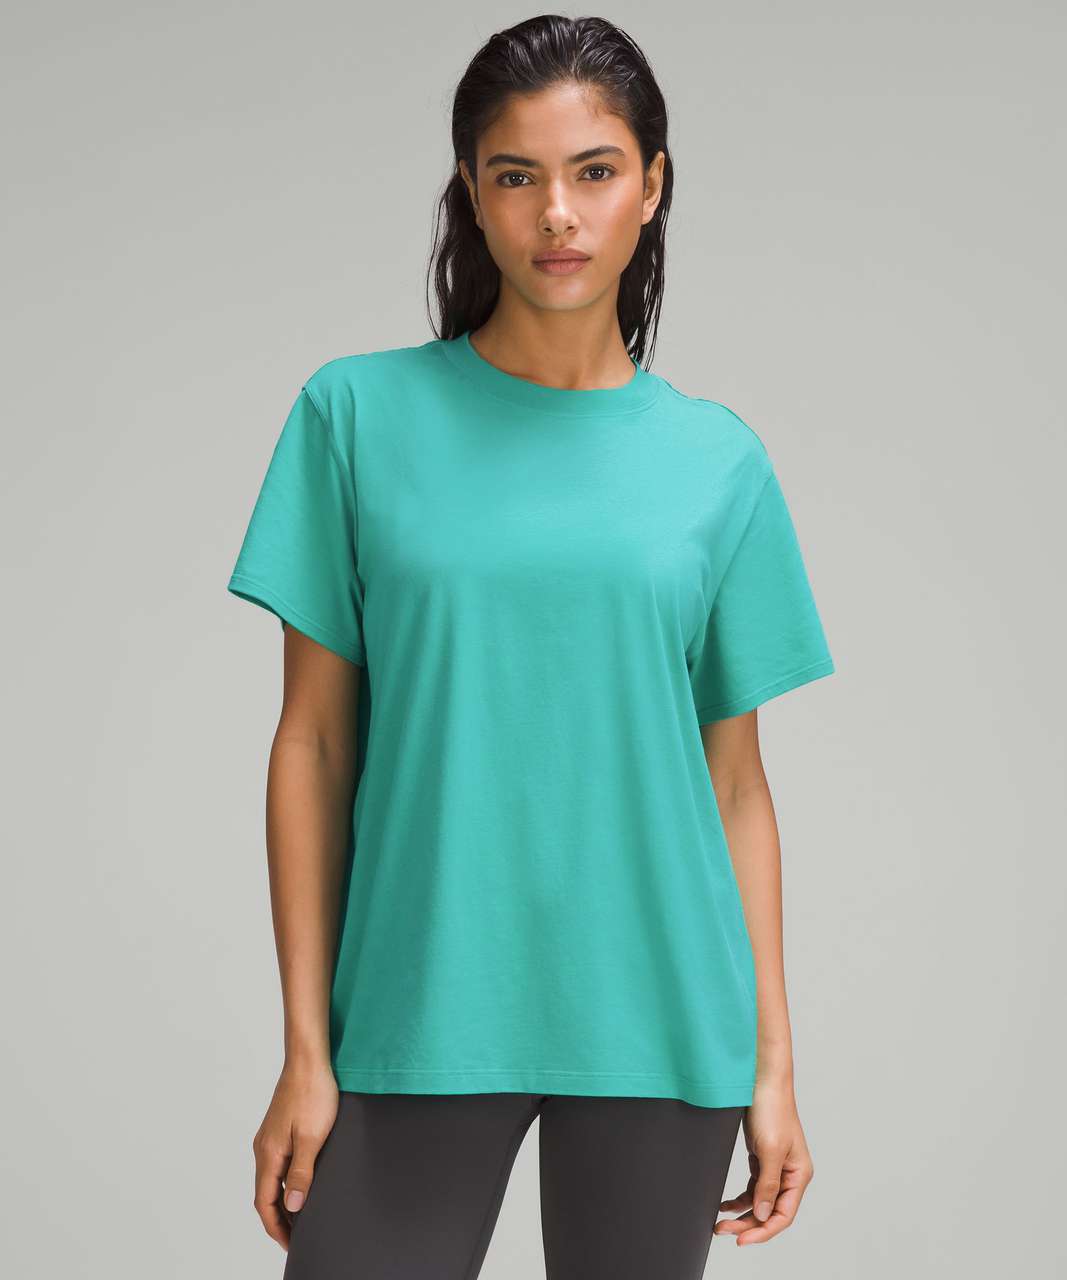 Lululemon All Yours Cotton T-Shirt - Kelly Green